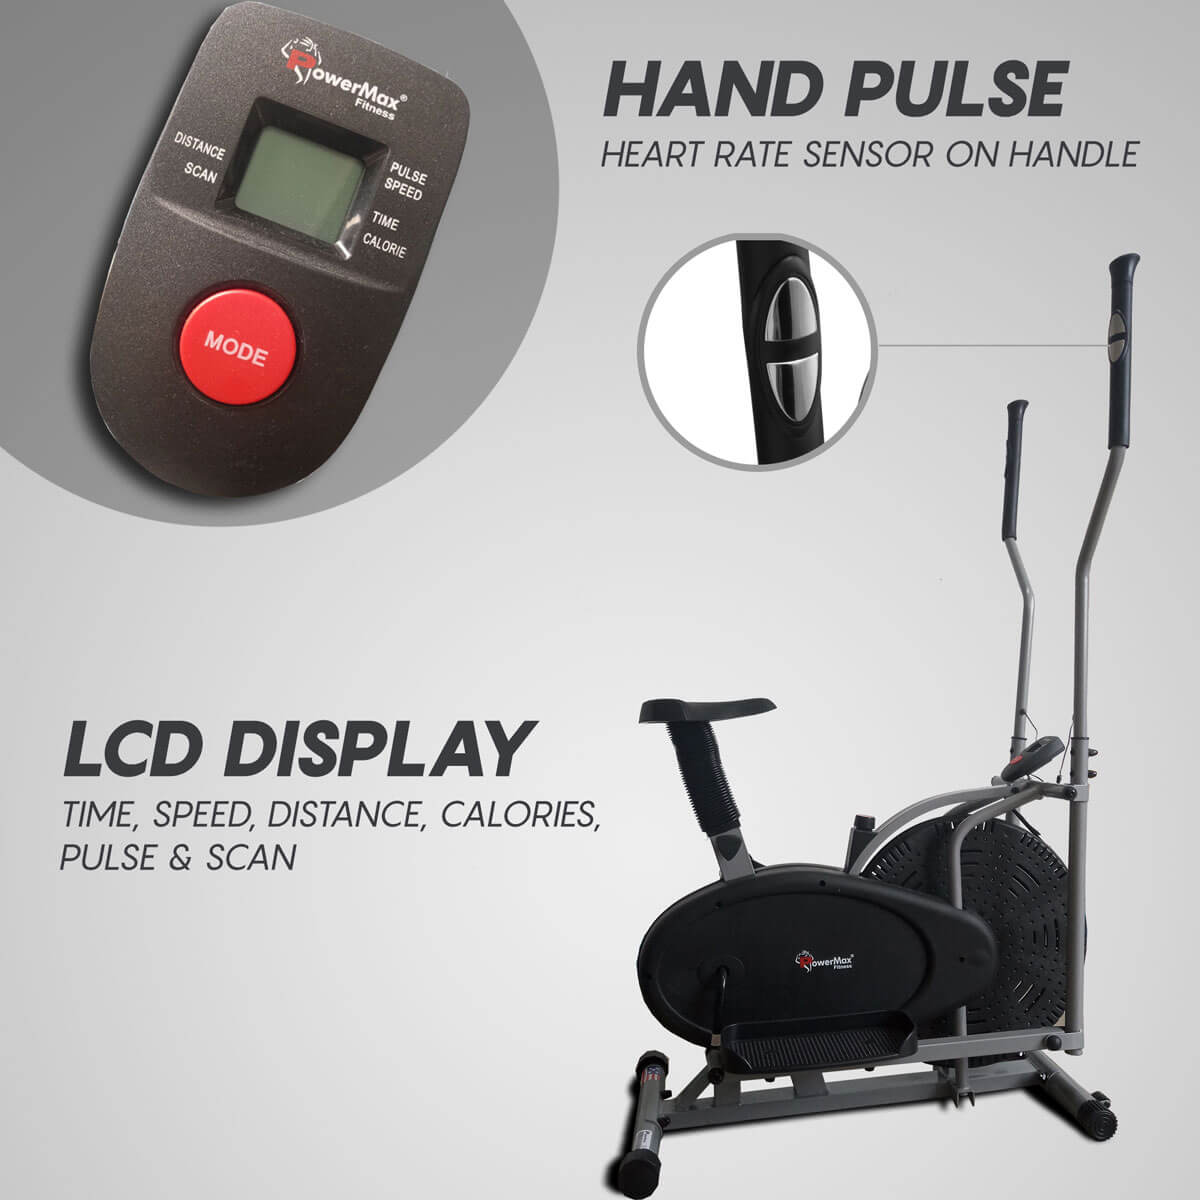 Elliptical cross trainer with hand pulse